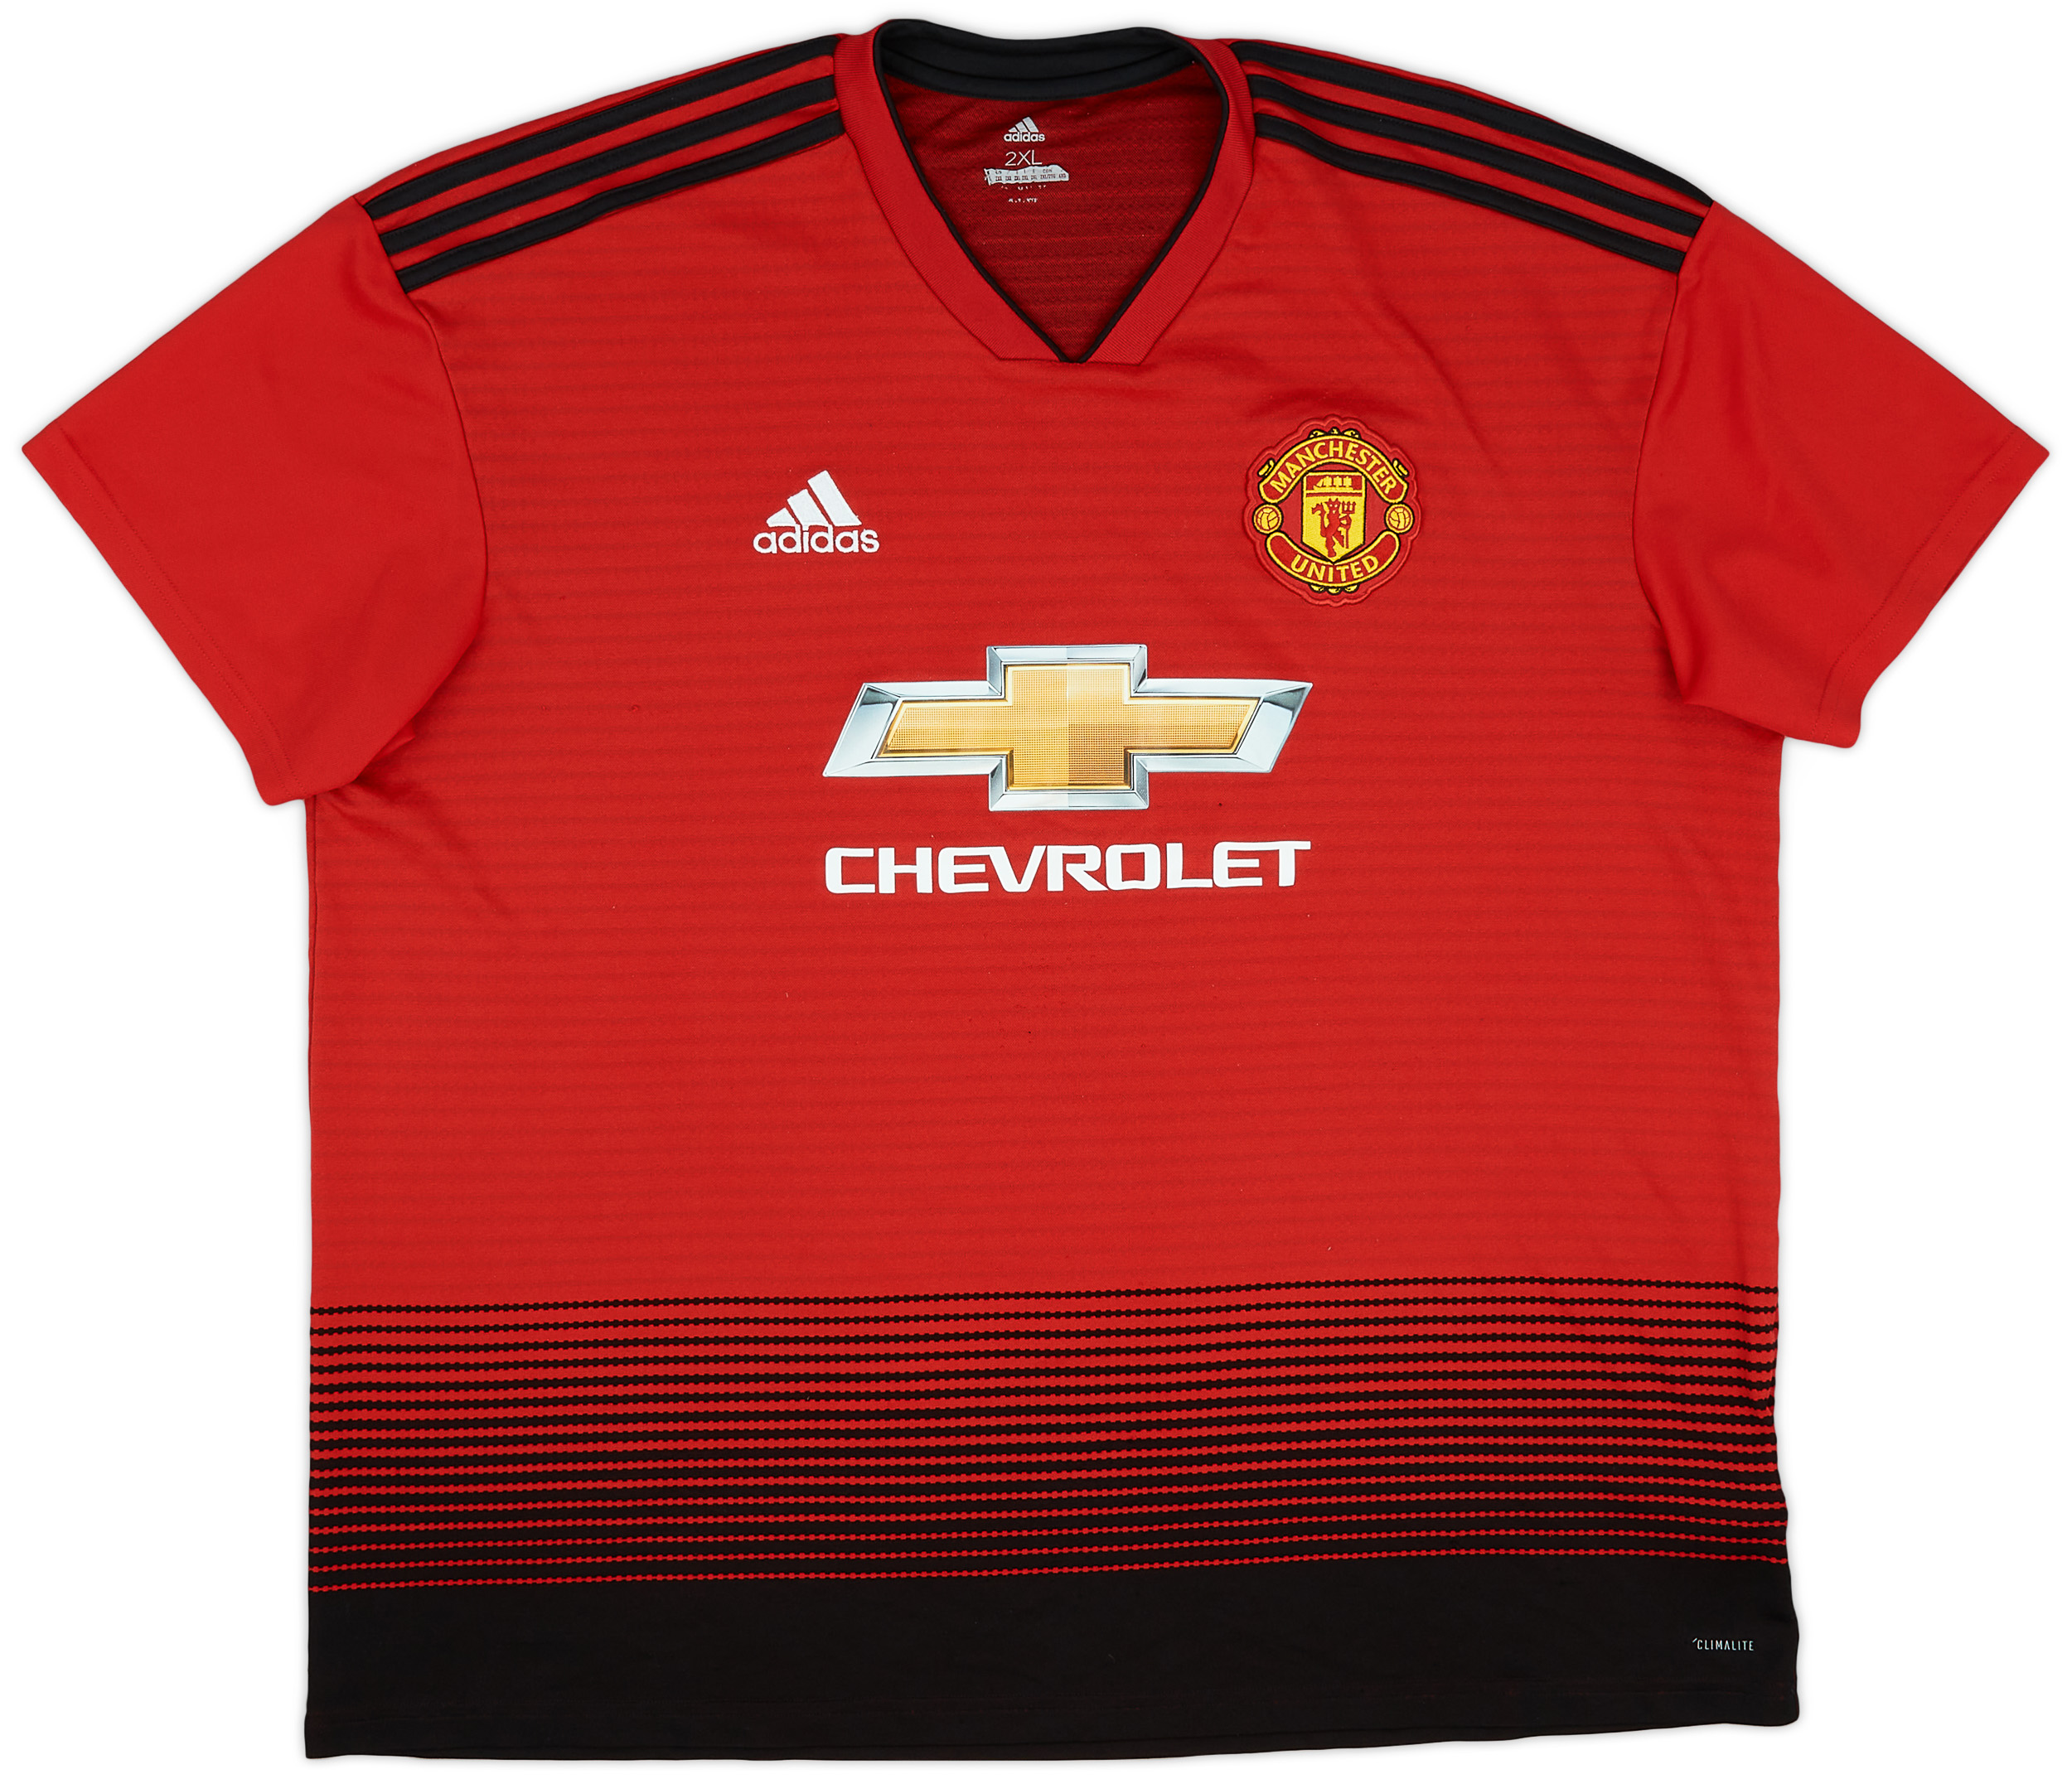 2018-19 Manchester United Home Shirt - 8/10 - ()